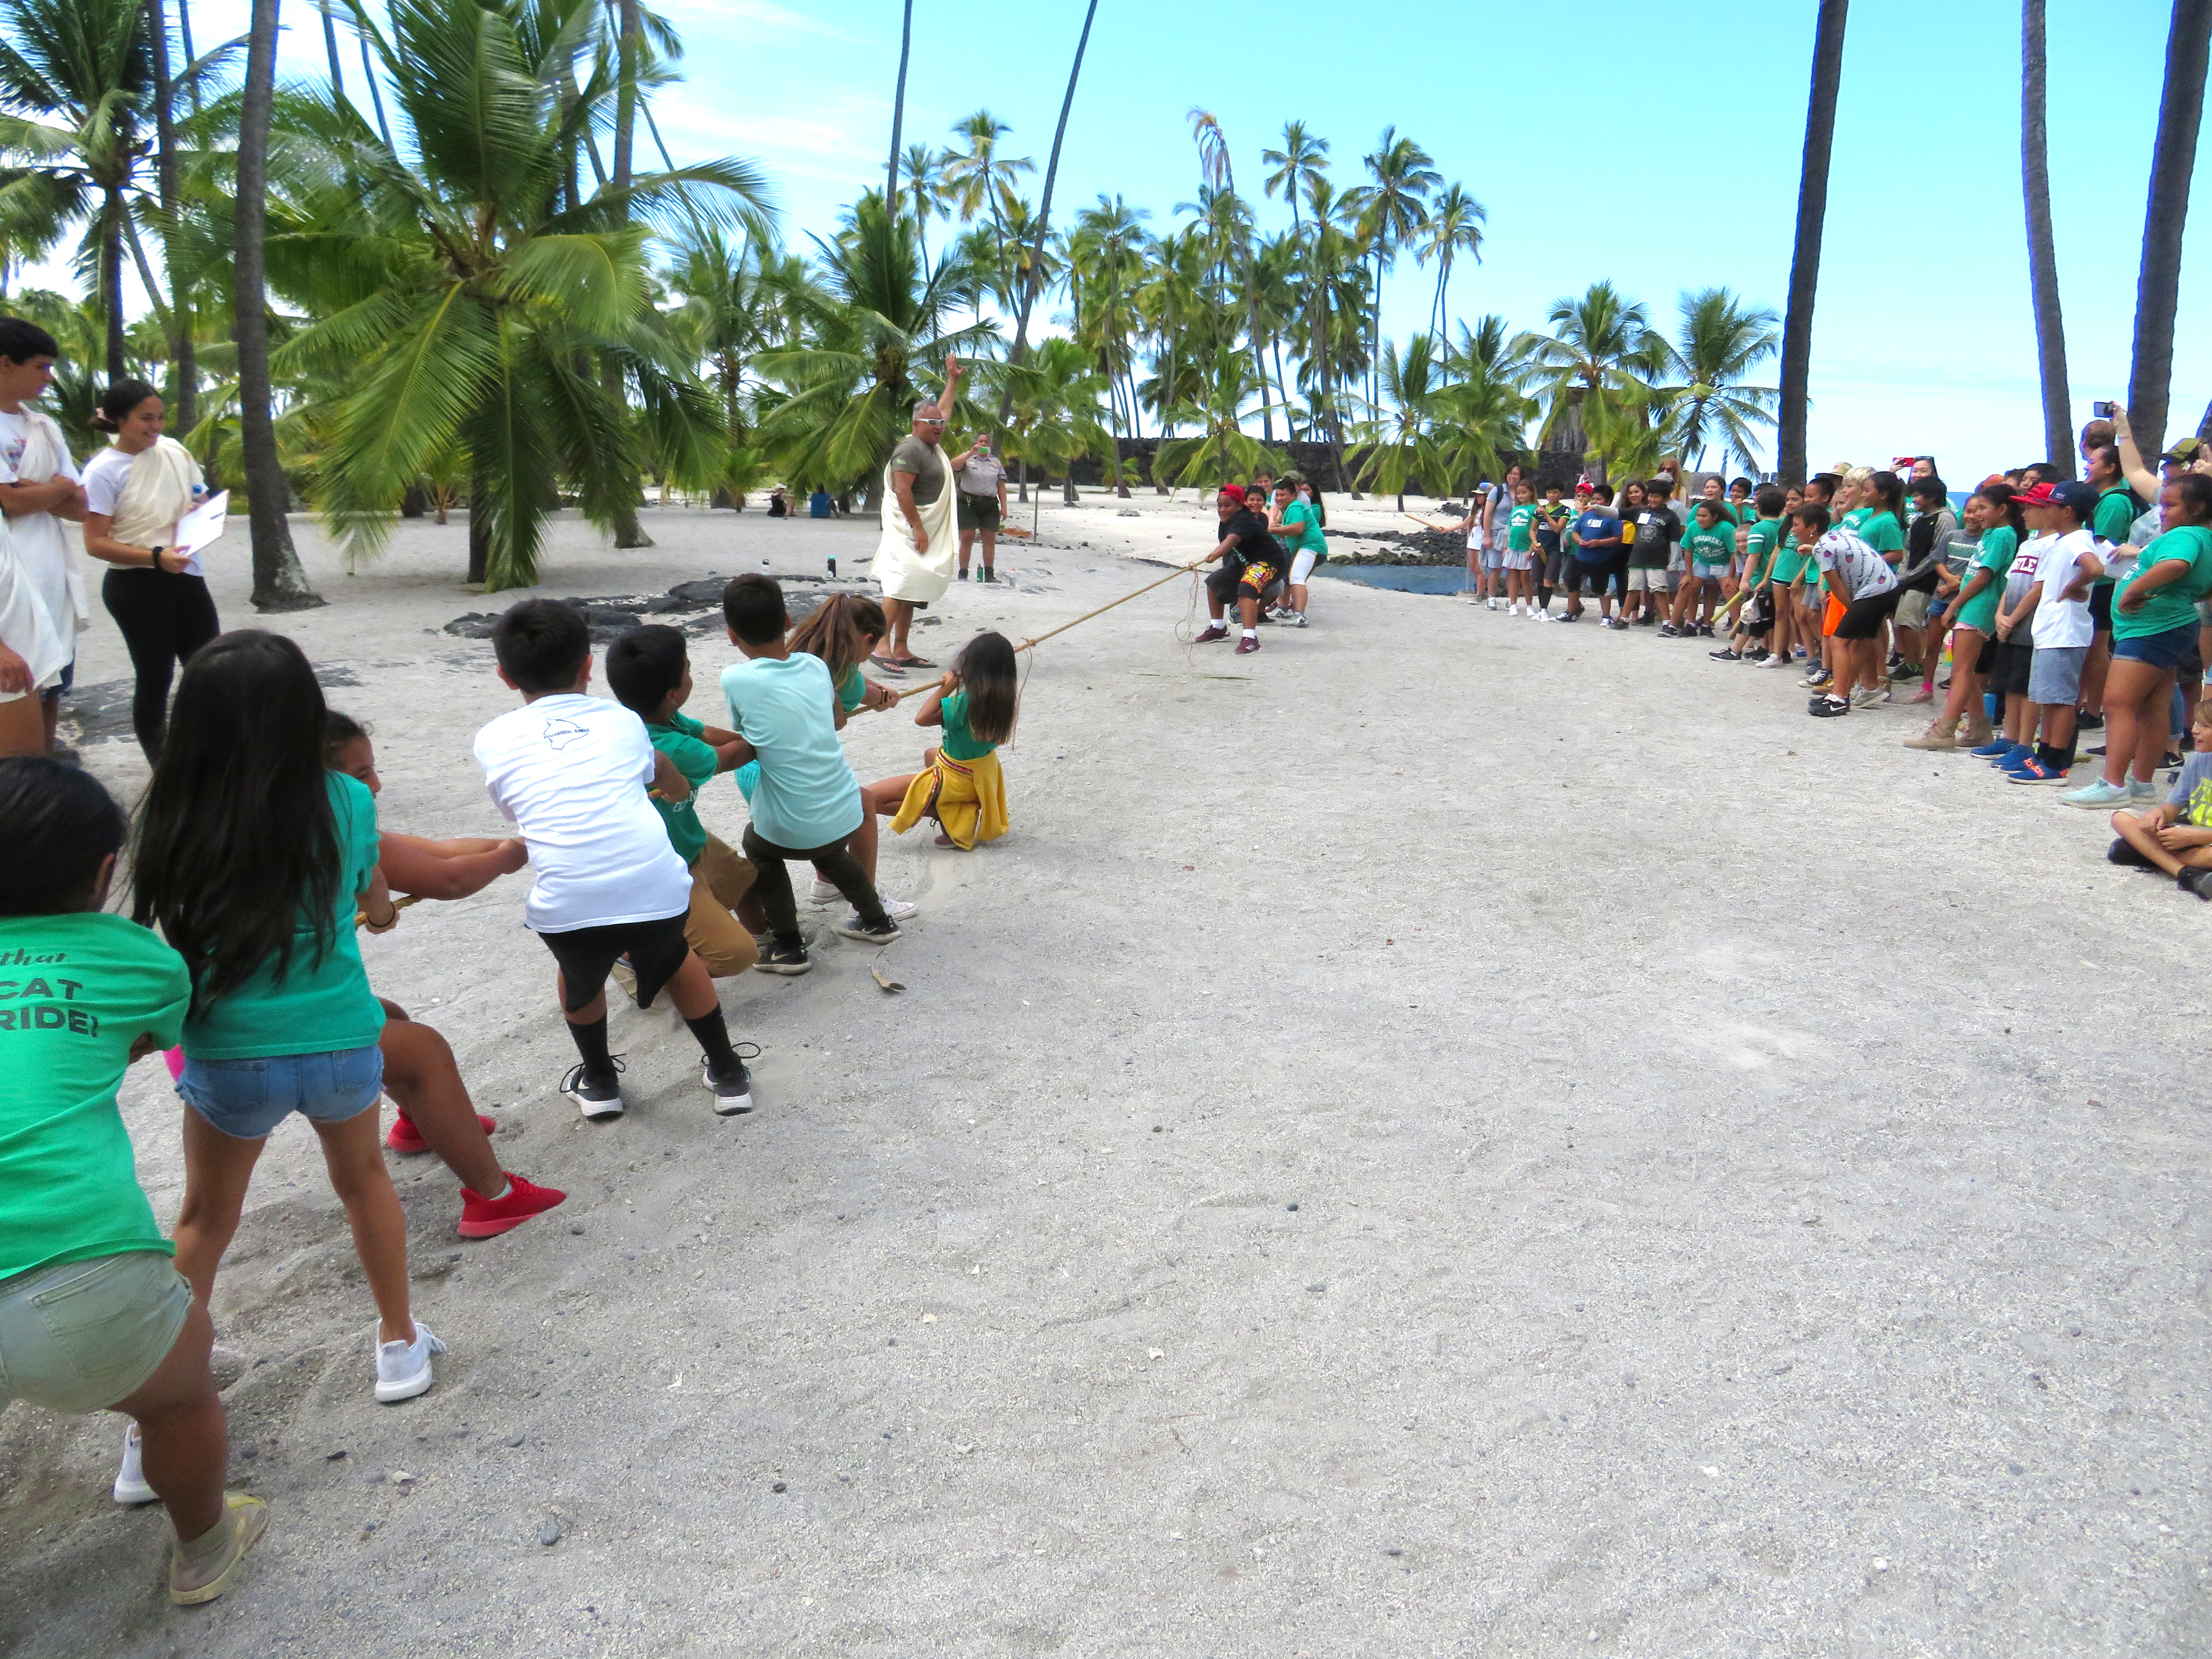 School children play huki huki (tug of war) upon the sandy shores of the Royal Grounds. A referee in a white kihei signals the start of the game.